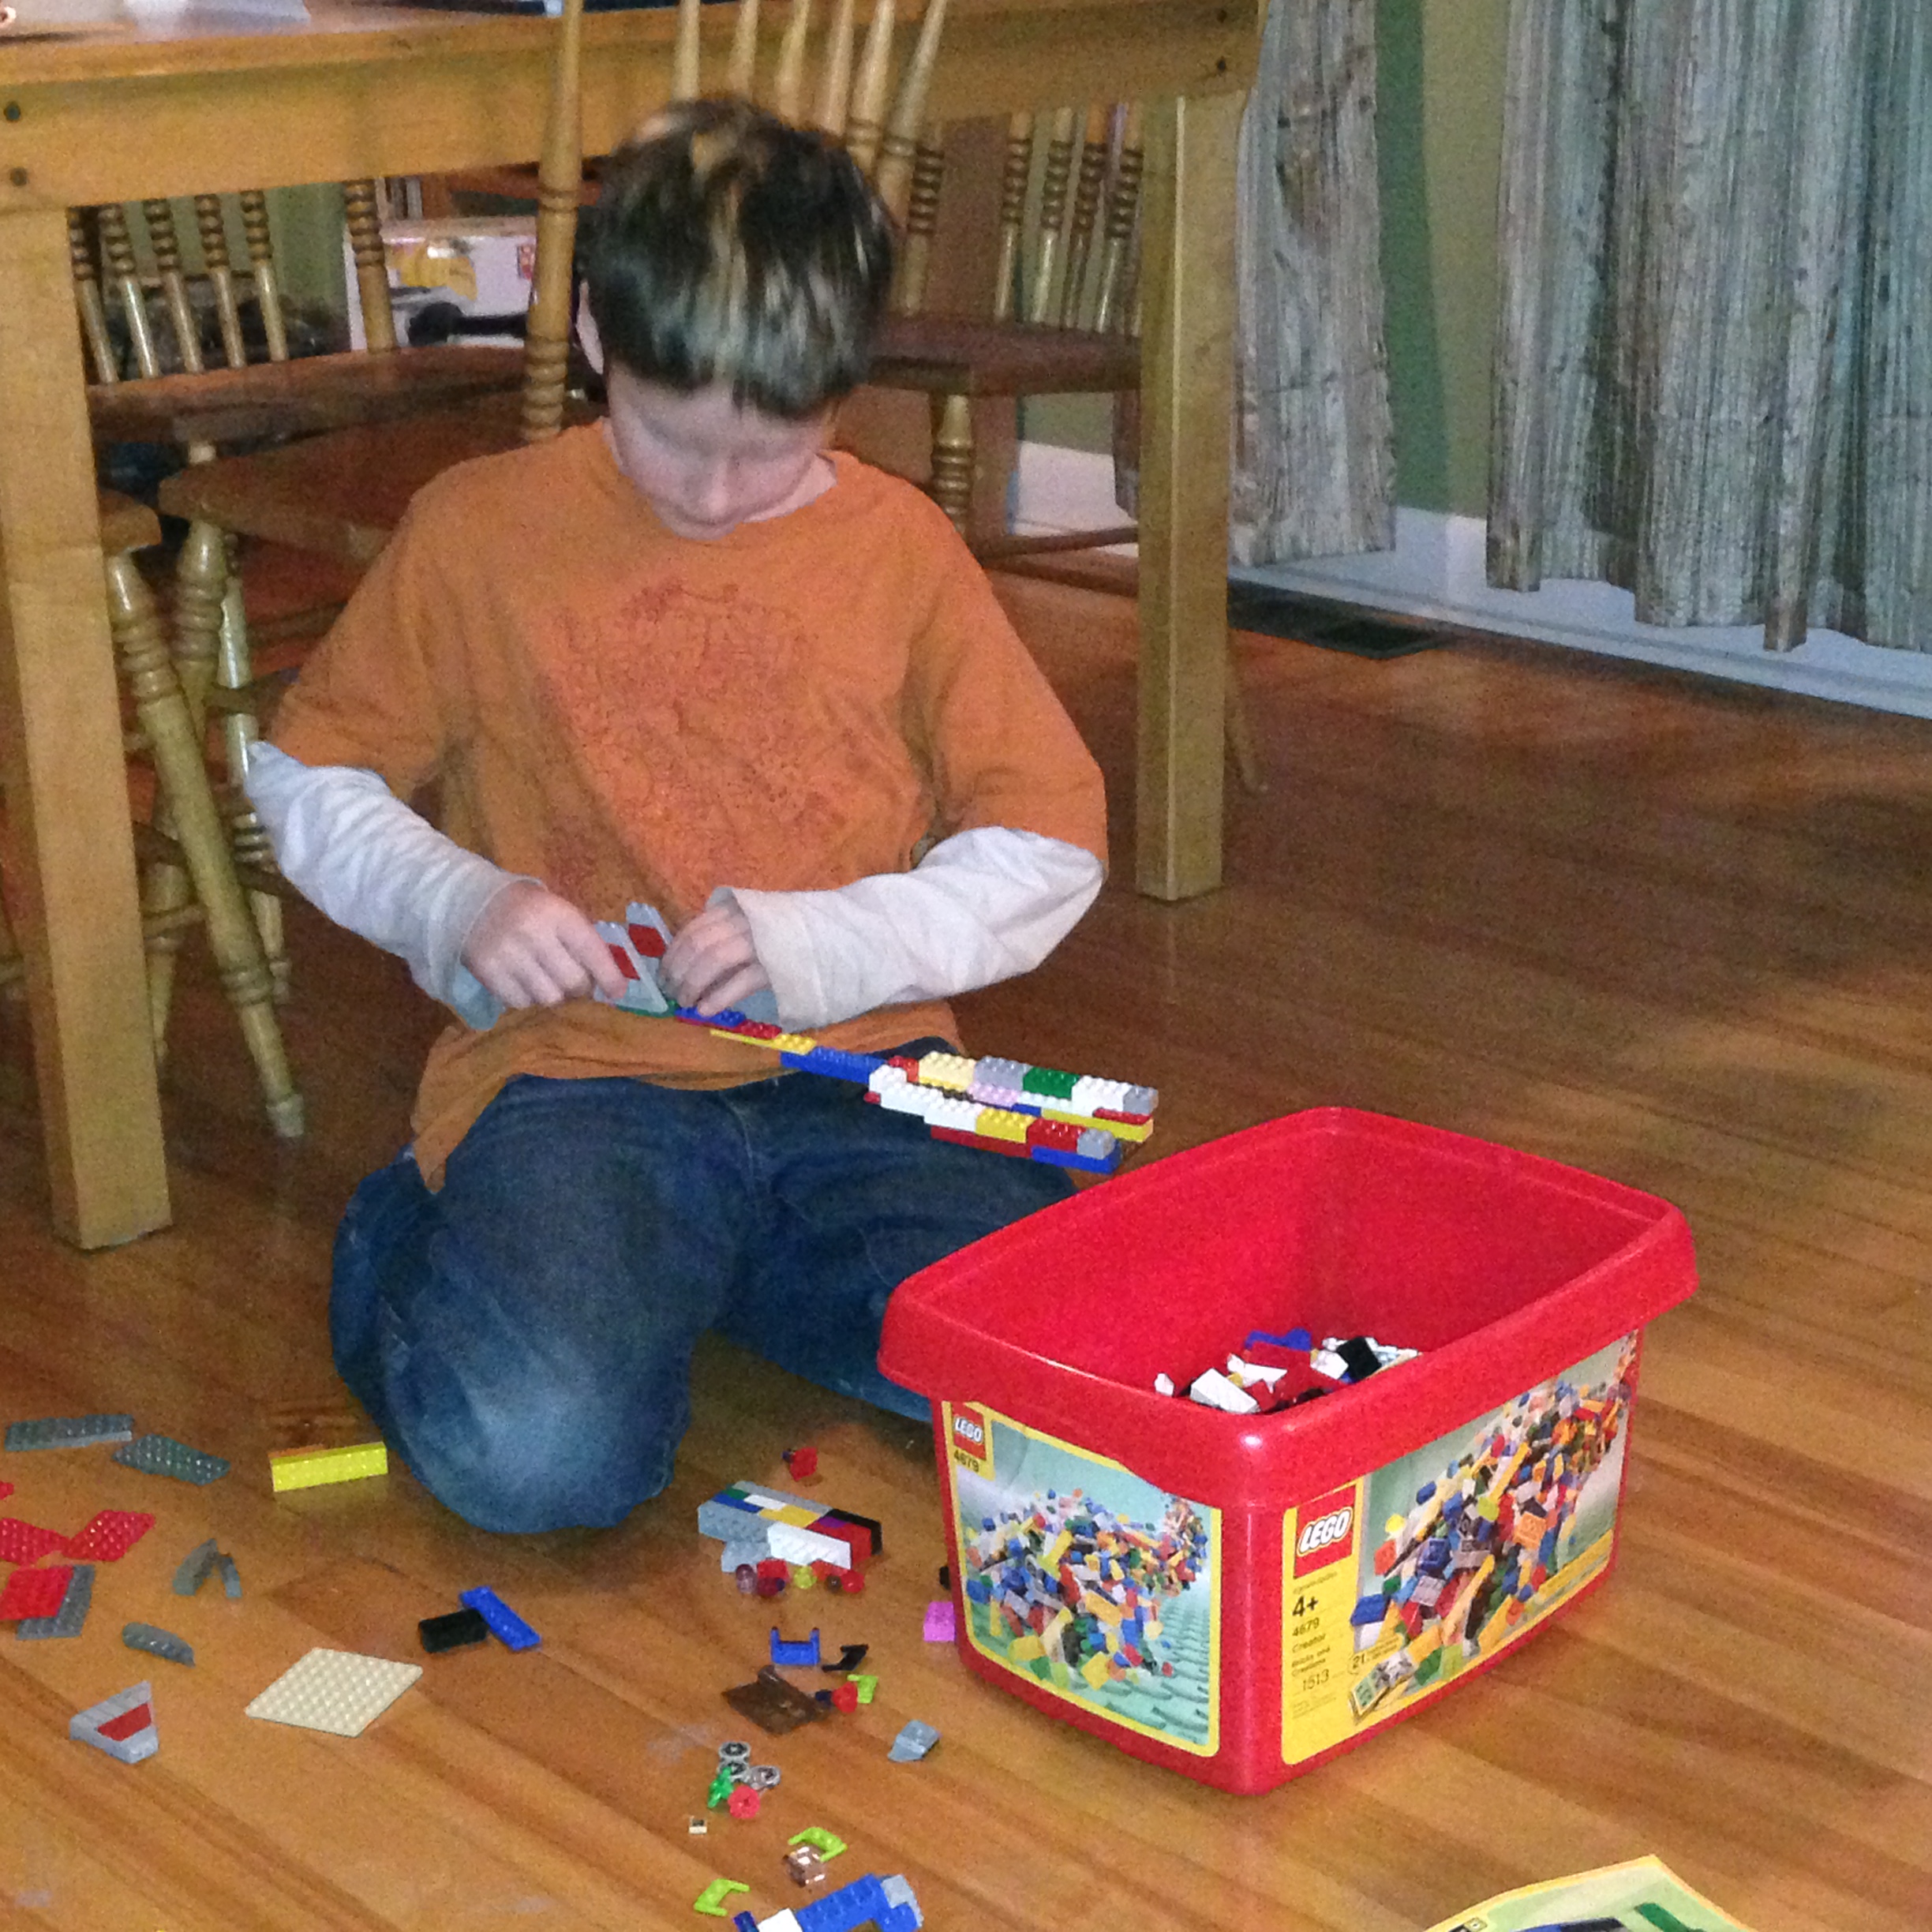 Isaac working on one of his many Lego inventions.